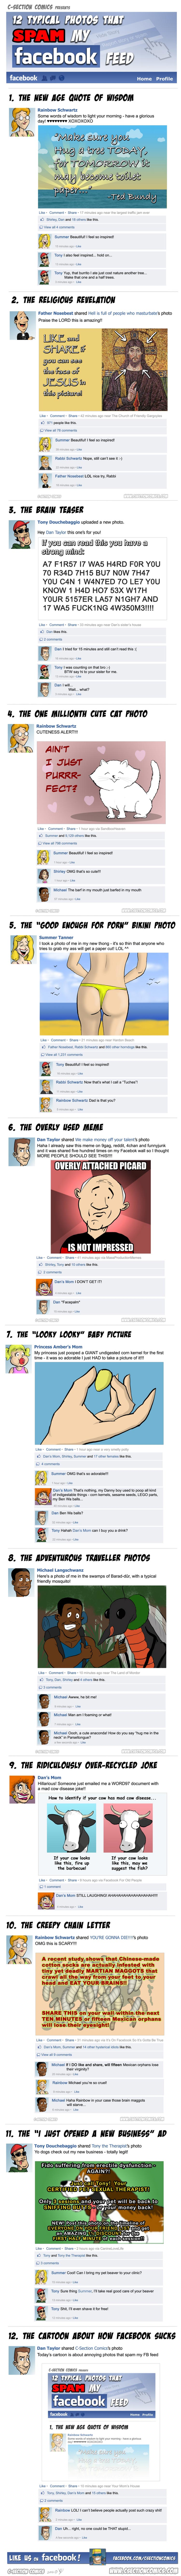 12 Typical Photos That Spam My Facebook Feed